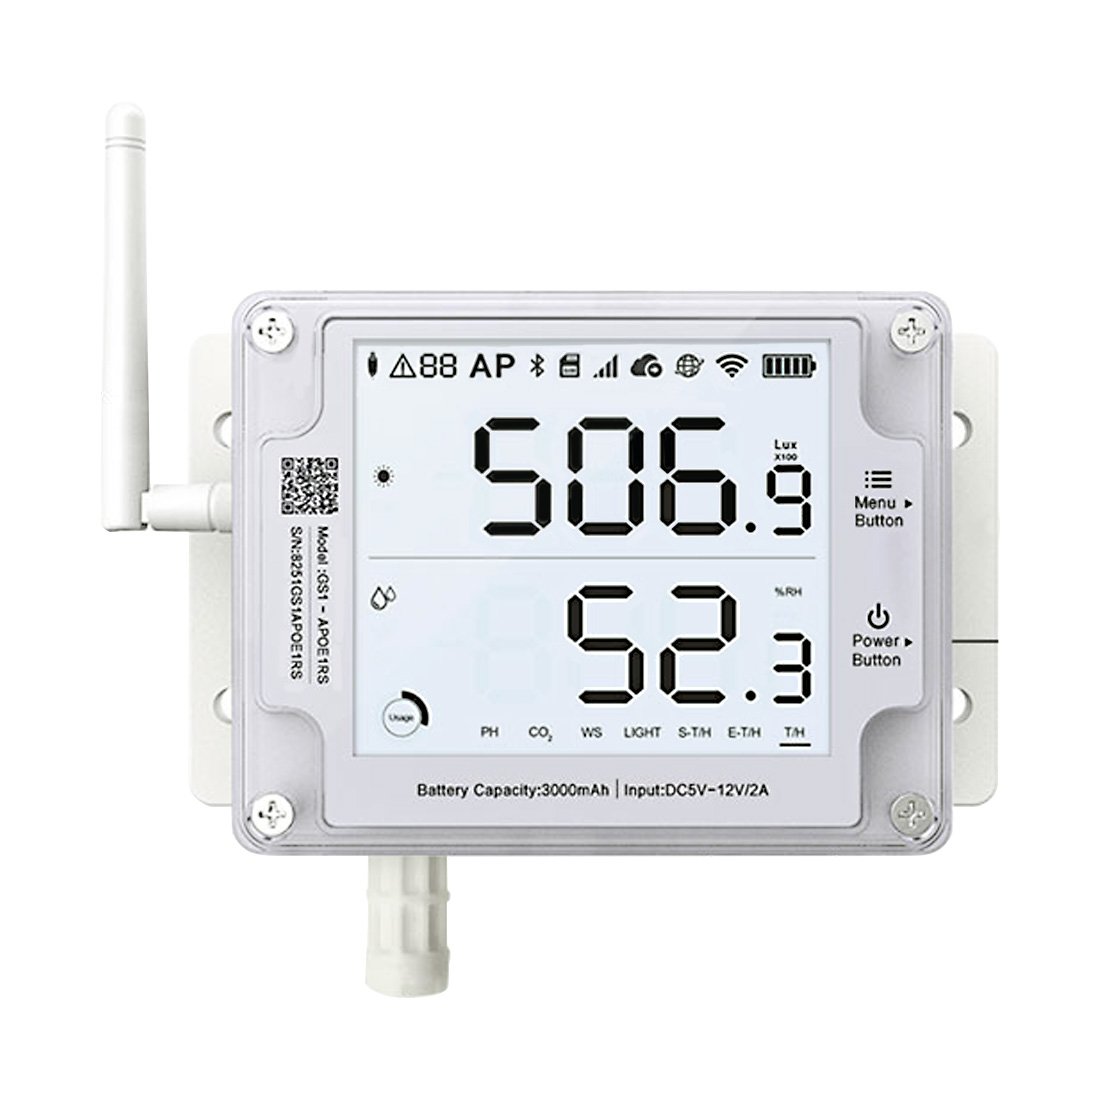 Outdoor Monitor with Spot Check Temperature & Humidity Sensor